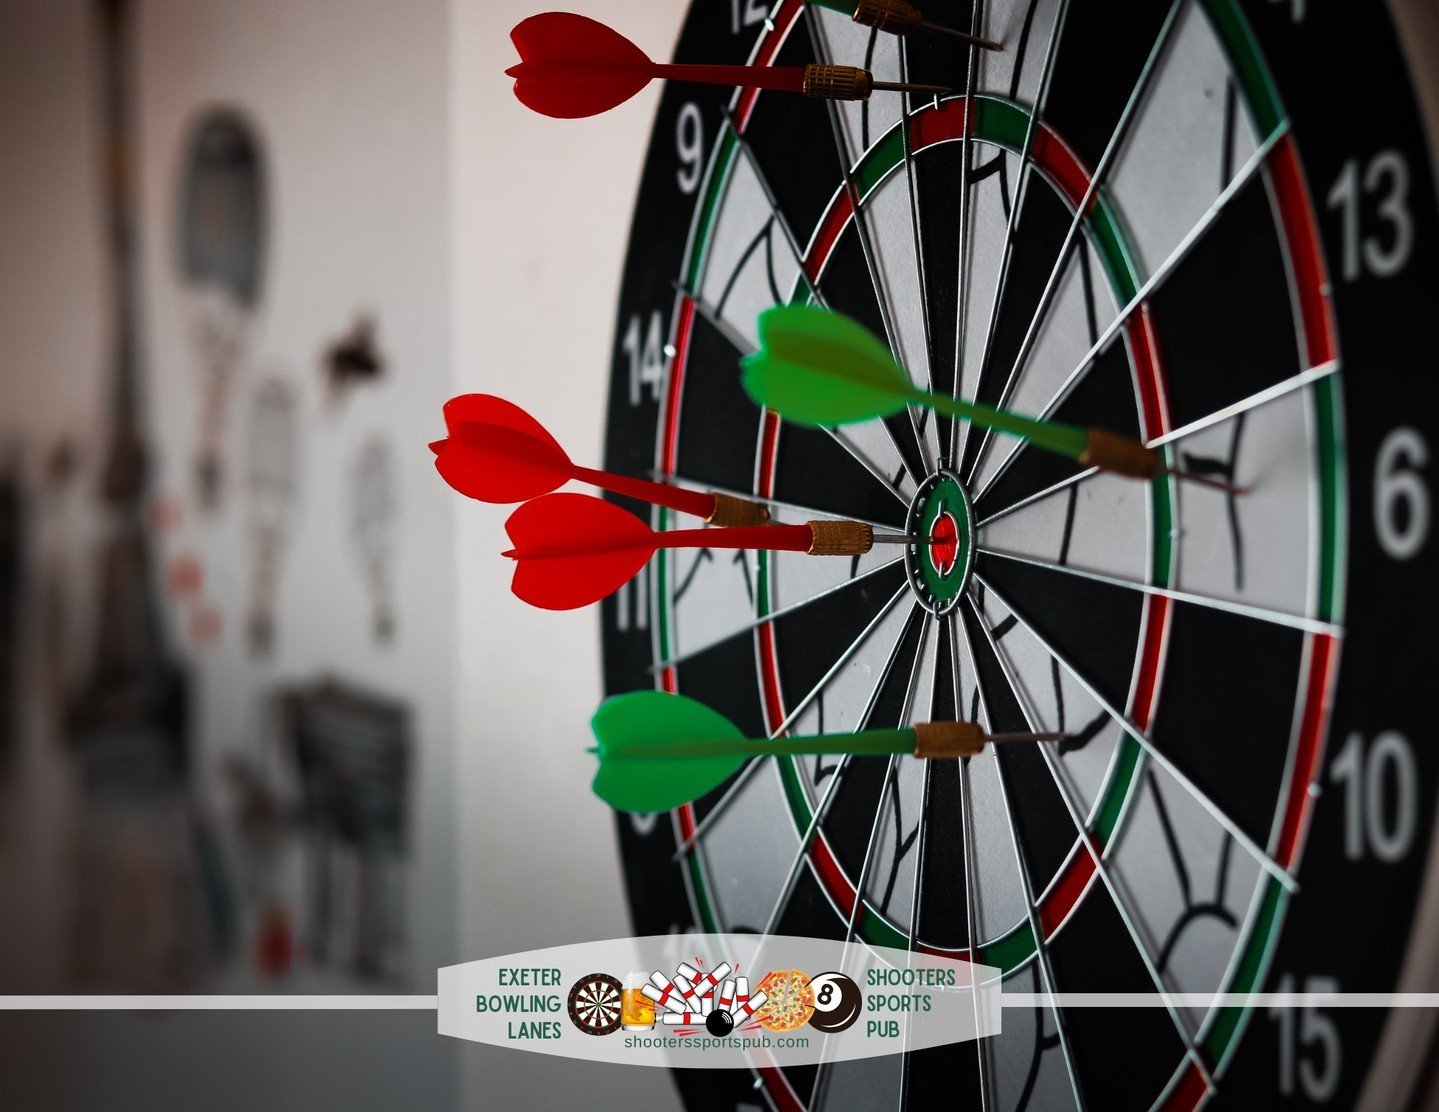 Feeling a bit stabby this Sunday? 🎯 ⁠
⁠
Come throw some darts at Shooters (at the board, of course). Let's keep it friendly, and you know. legal.⁠
⁠
Open for Lunch &amp; Dinner (11 am - close, kitchen closes at 10 pm) ⁠
⁠
#DartNight #SundayFunday⁠